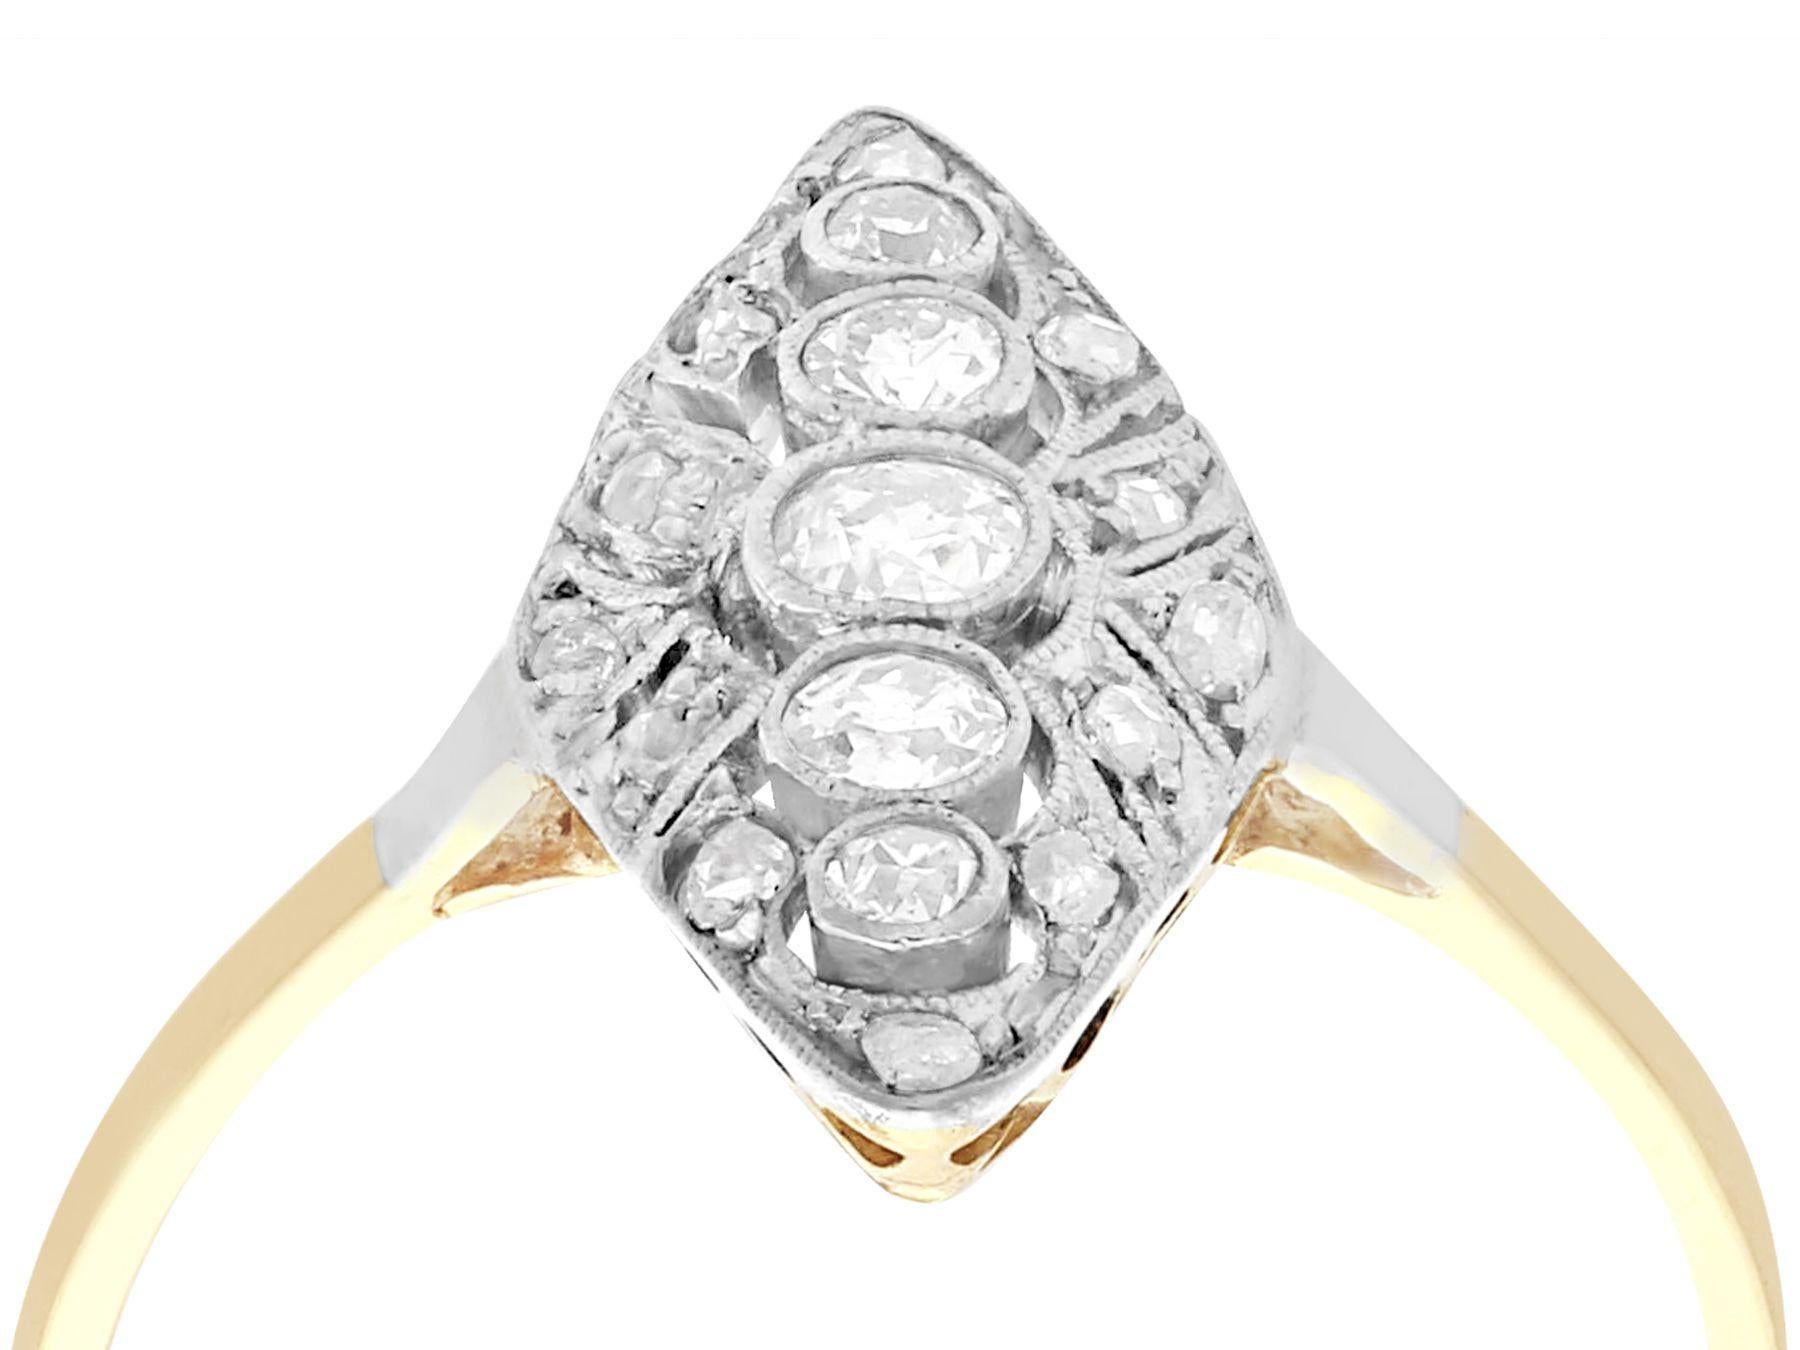 An impressive antique 0.39 carat diamond and 14 karat yellow gold, 14 karat white gold set marquise shaped ring; part of our diverse antique jewelry collections

This fine and impressive antique marquise diamond ring has been crafted in 14k yellow